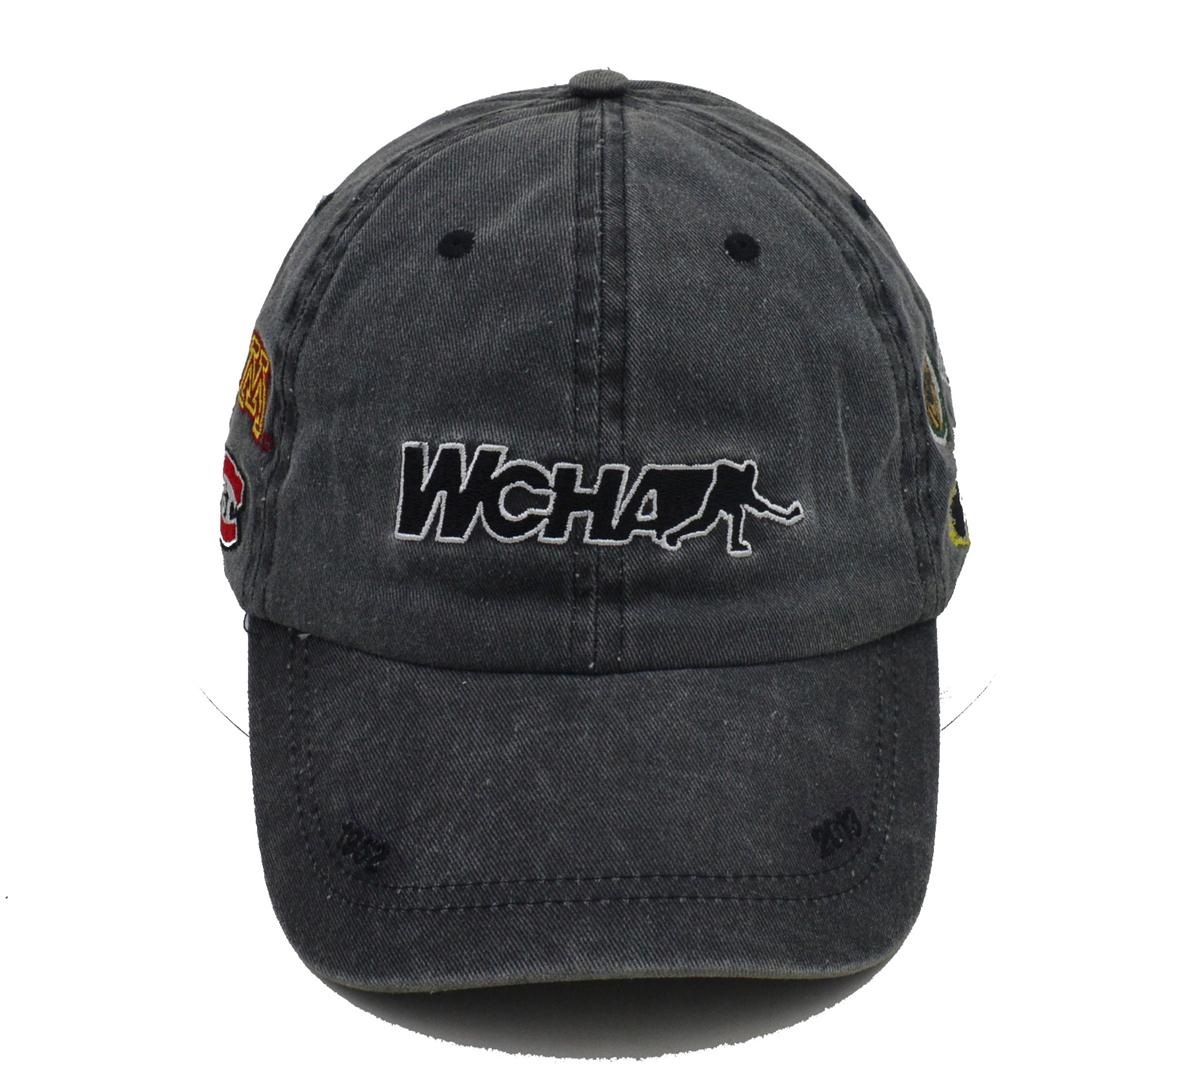 Washed cotton baseball cap with embroidery logo